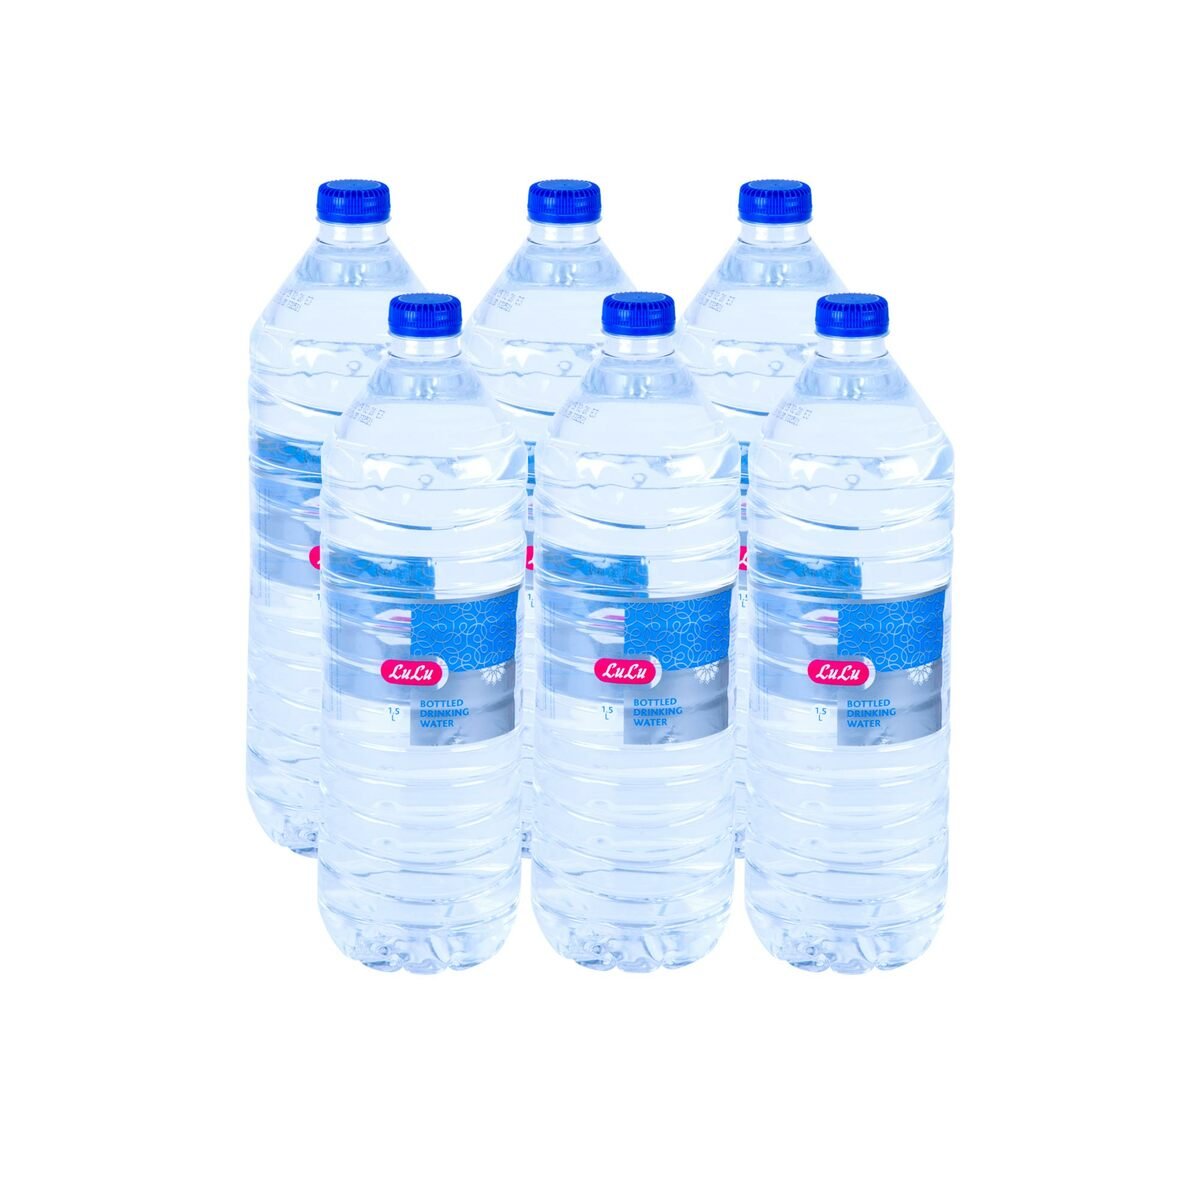 LuLu Natural Drinking Water 6 x 1.5 Litre